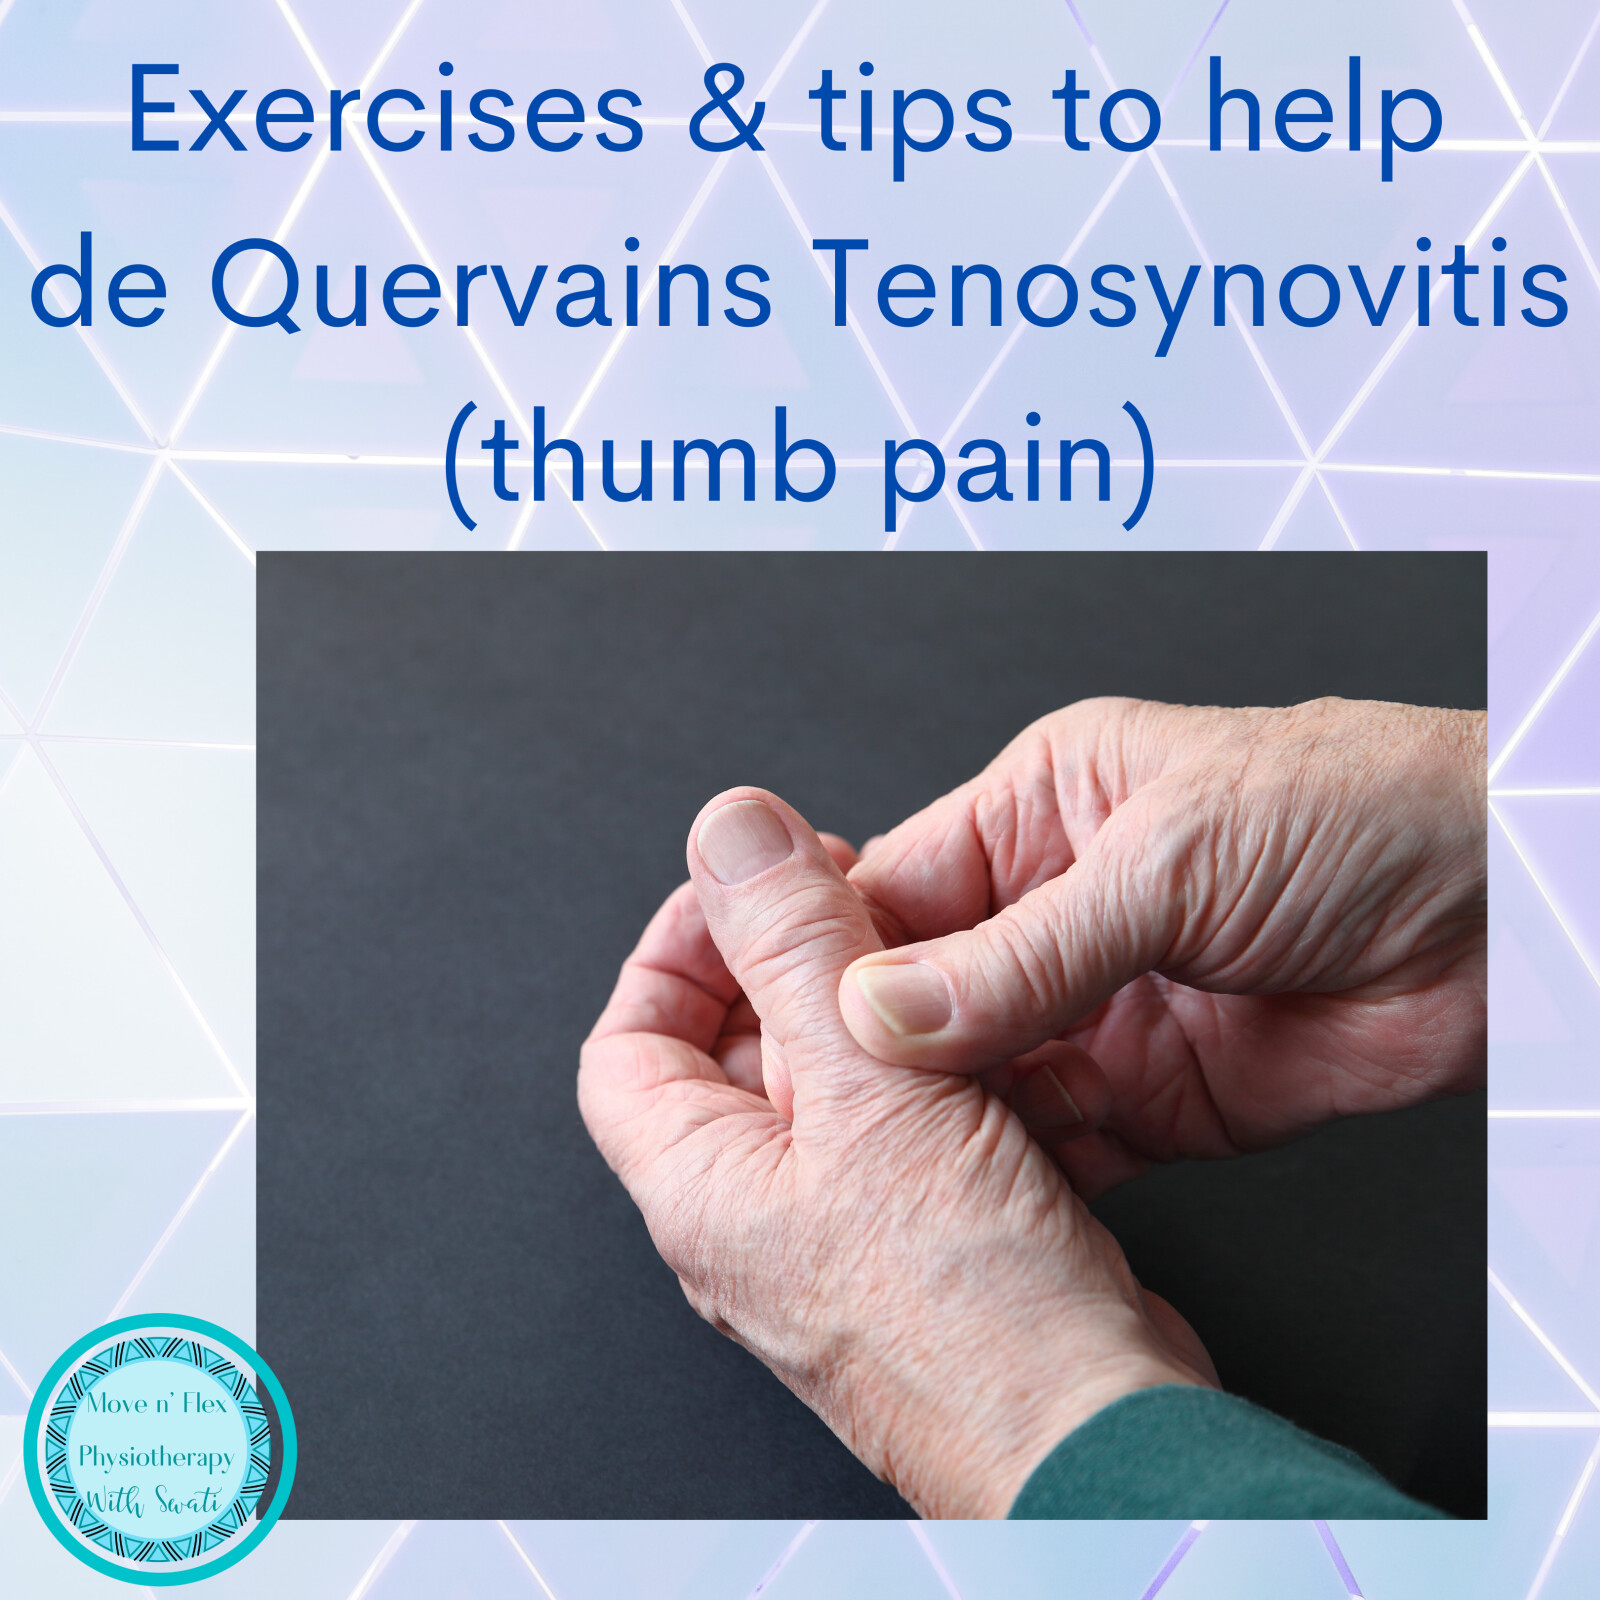 Exercises & tips to manage de Quervain's Tenosynovitis (thumb pain)